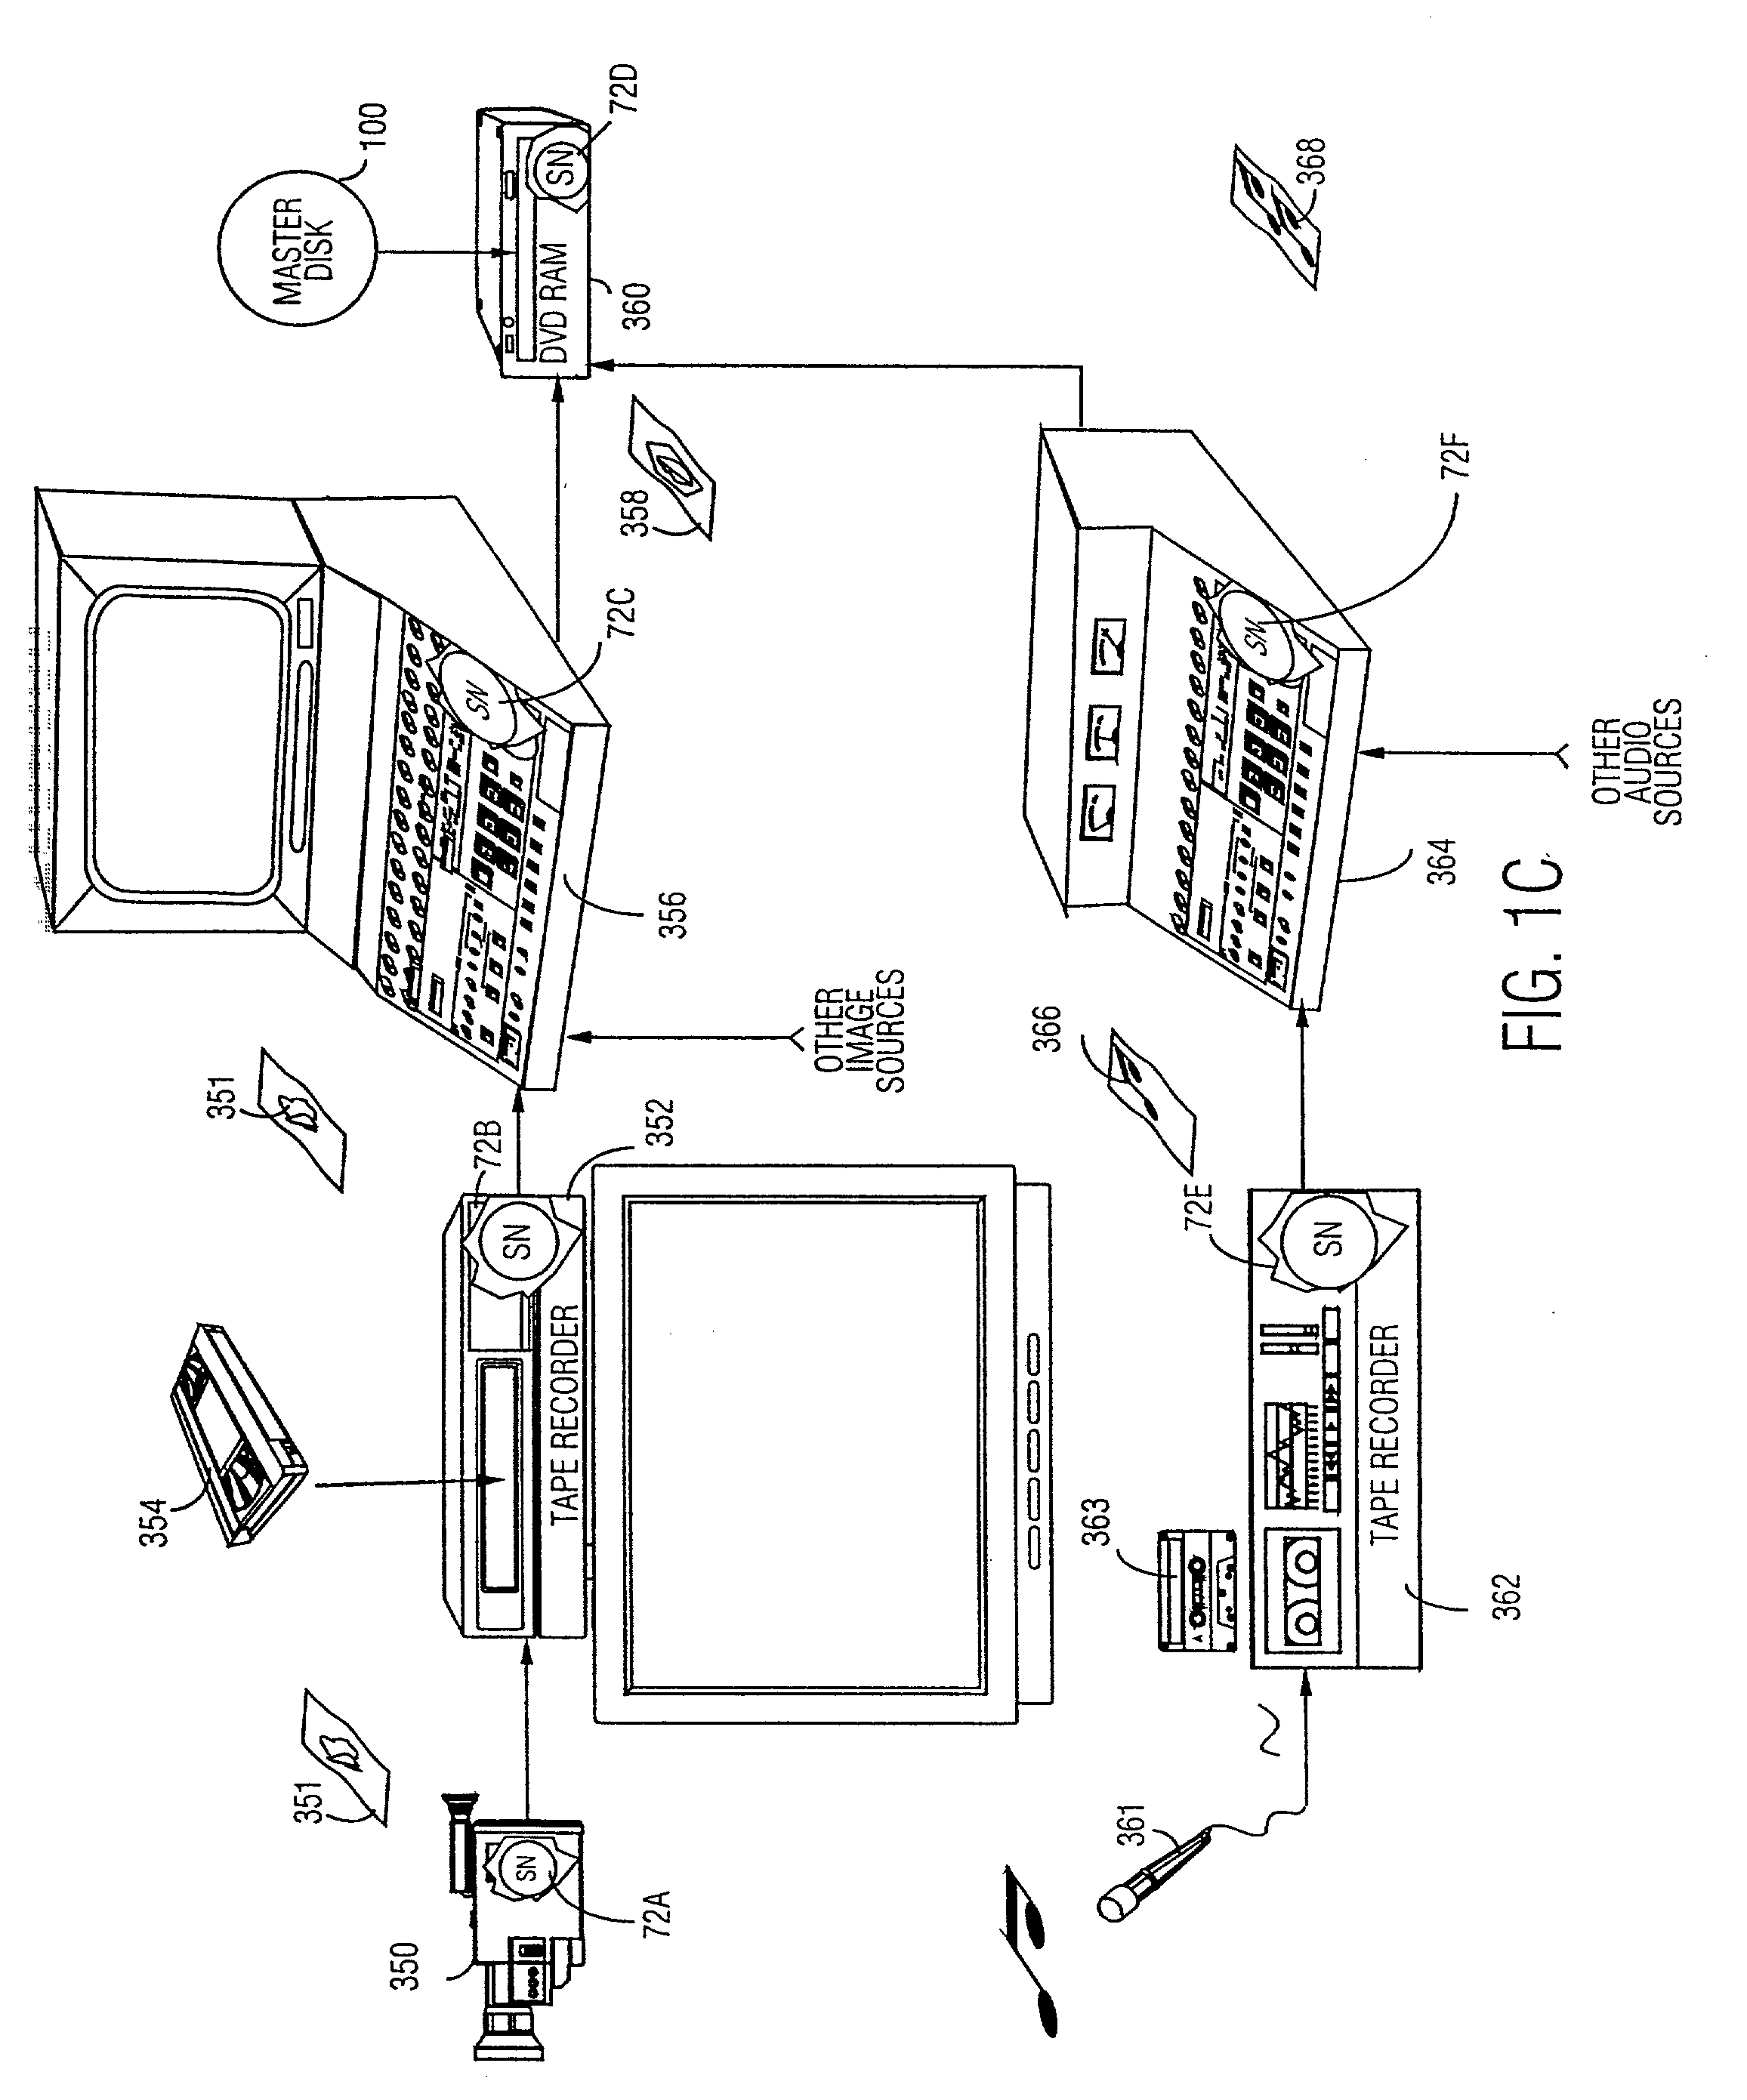 Cryptographic methods, apparatus and systems for storage media electronic rights management in closed and connected appliances